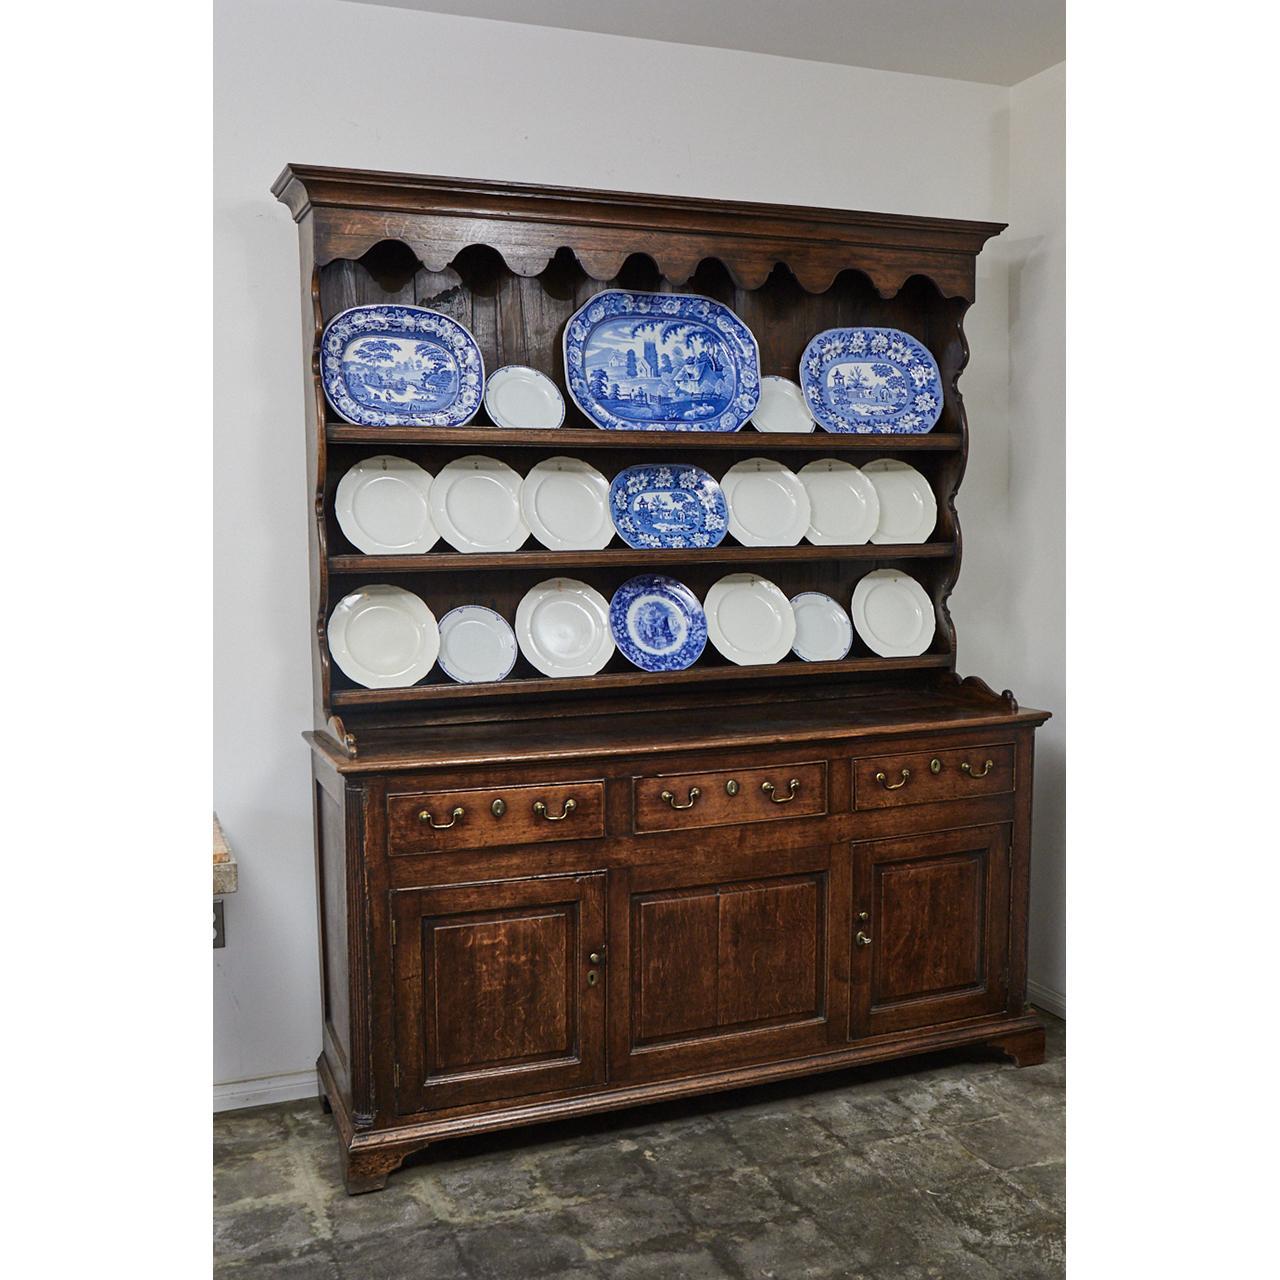 This English oak dresser has an 18th century base with a 19th century top. The piece has three shelves over three drawers and two doors. Each shelf has a plate holder. The top has carved decorative elements on the top and sides. The base has